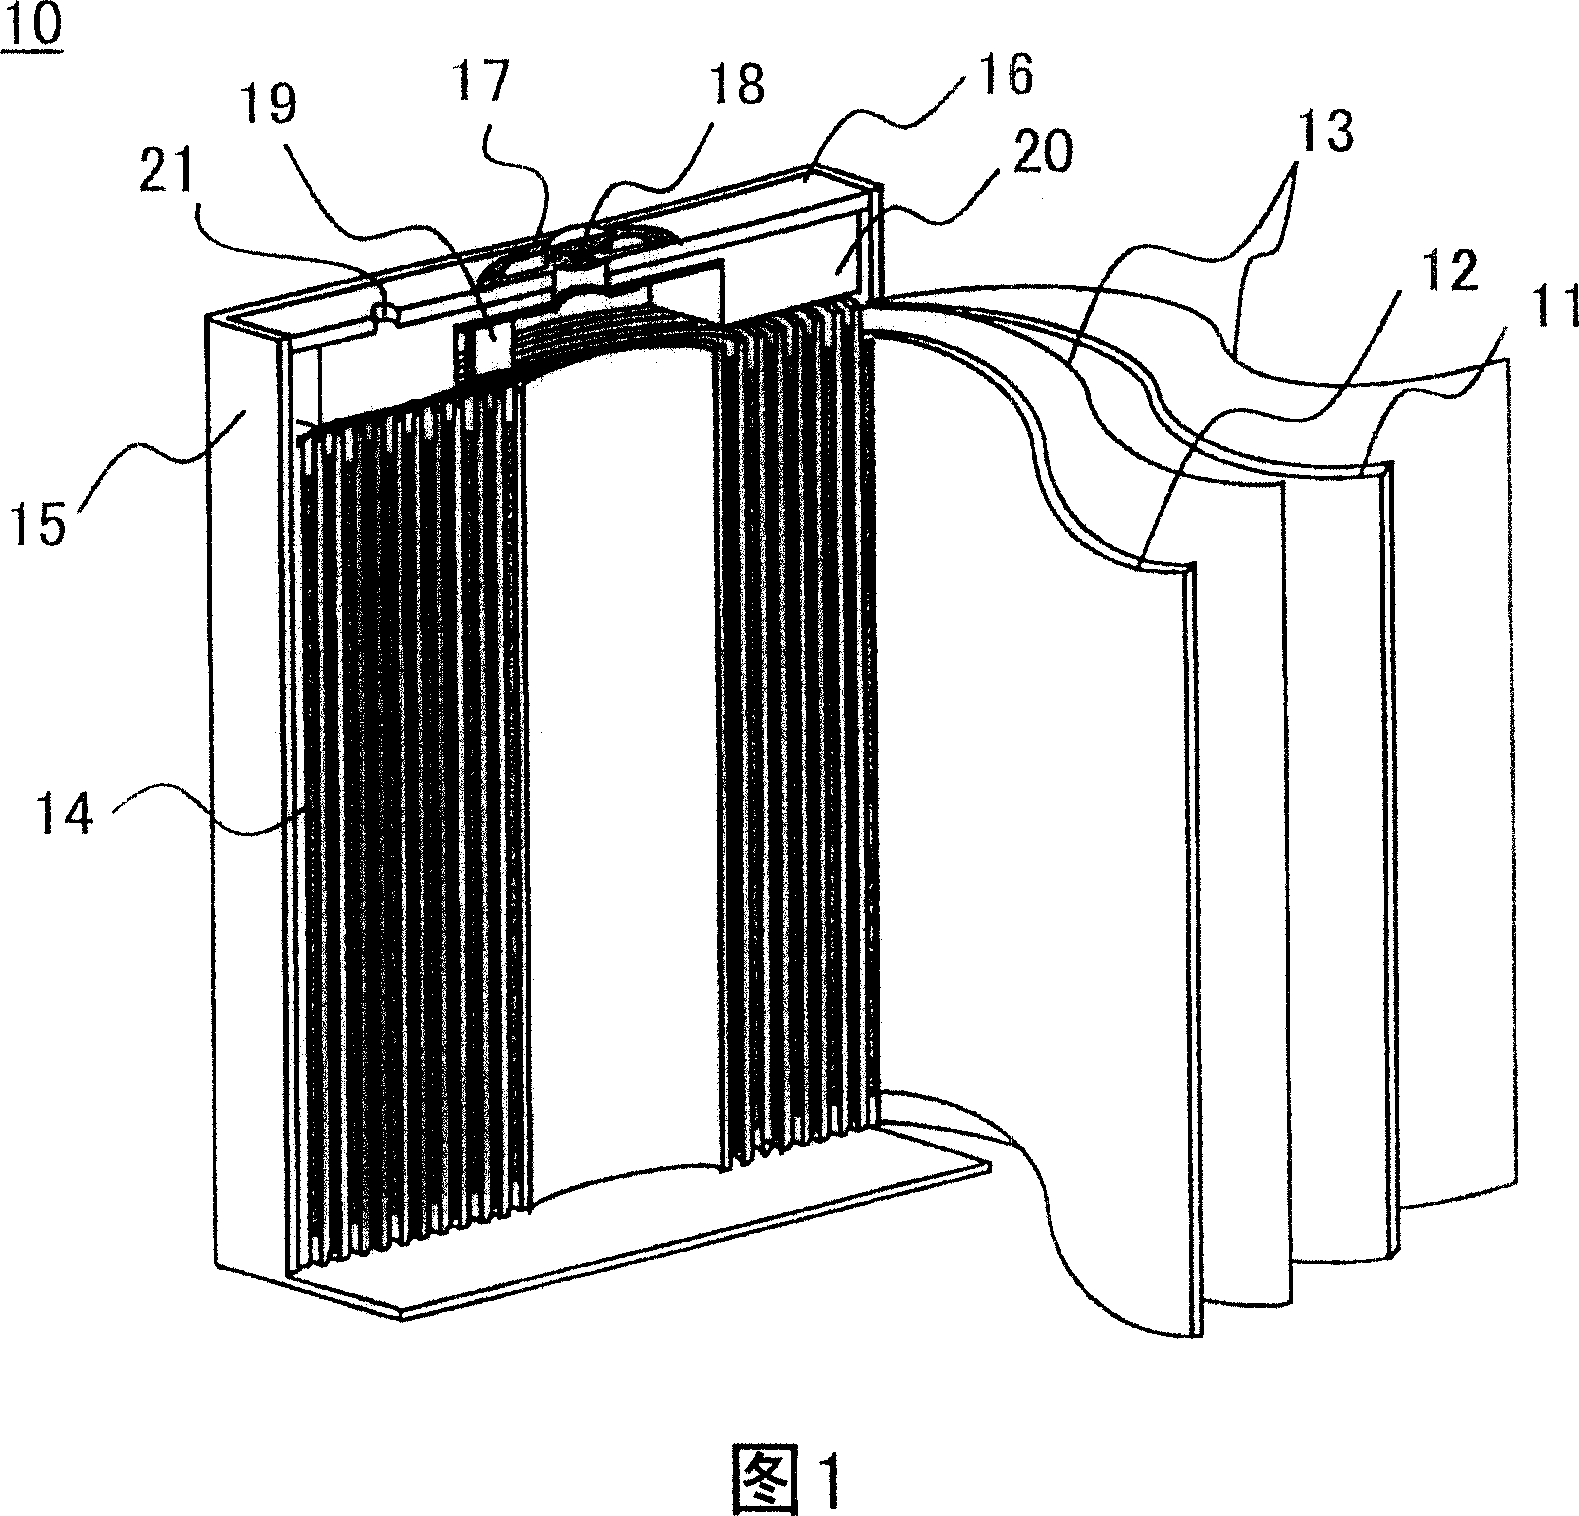 Nonaqueous electrolyte secondary cell, nonaqueous electrolyte and the method for charging the same